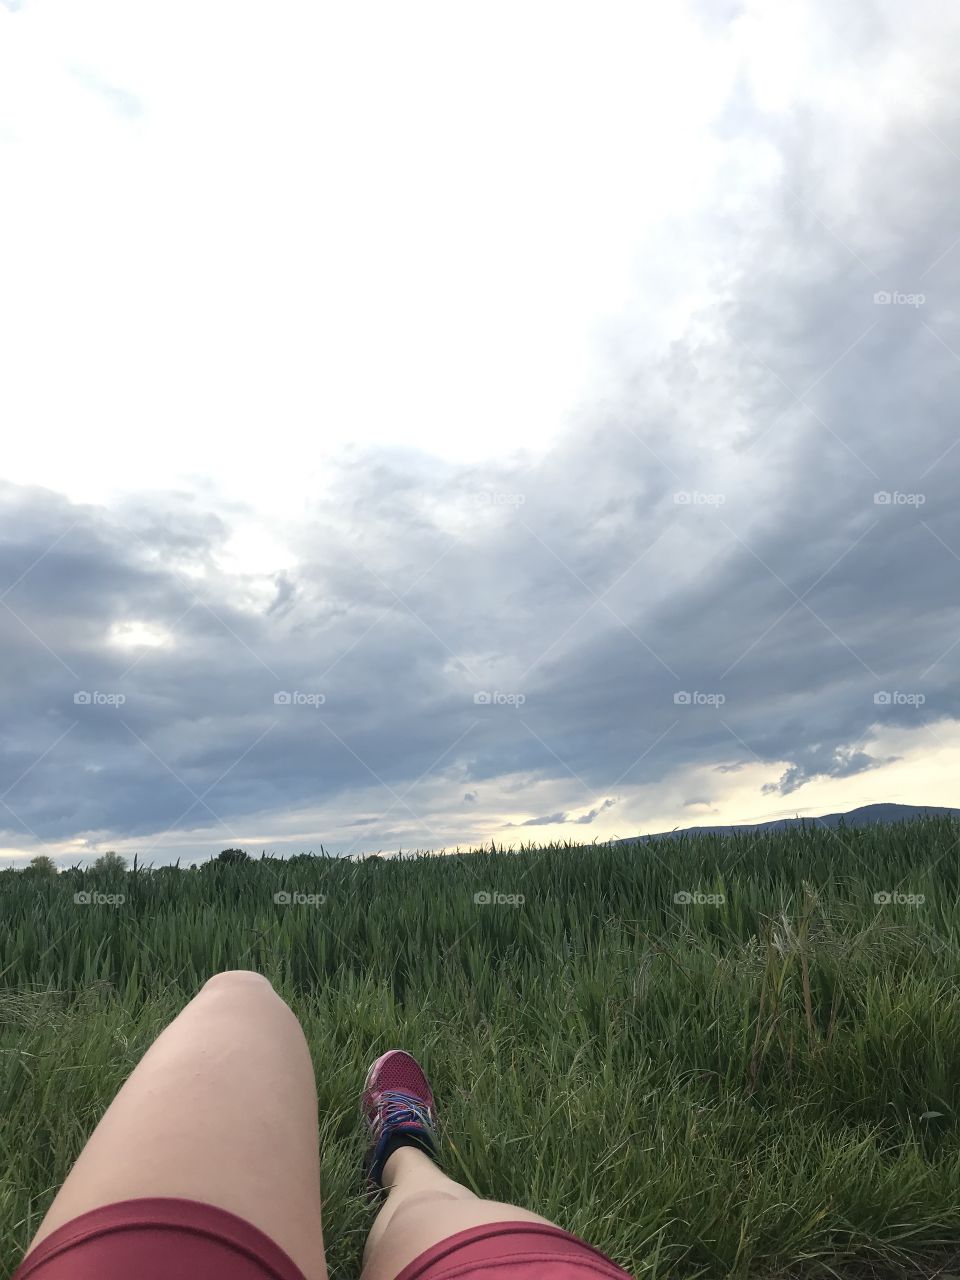 Laying down in nature 